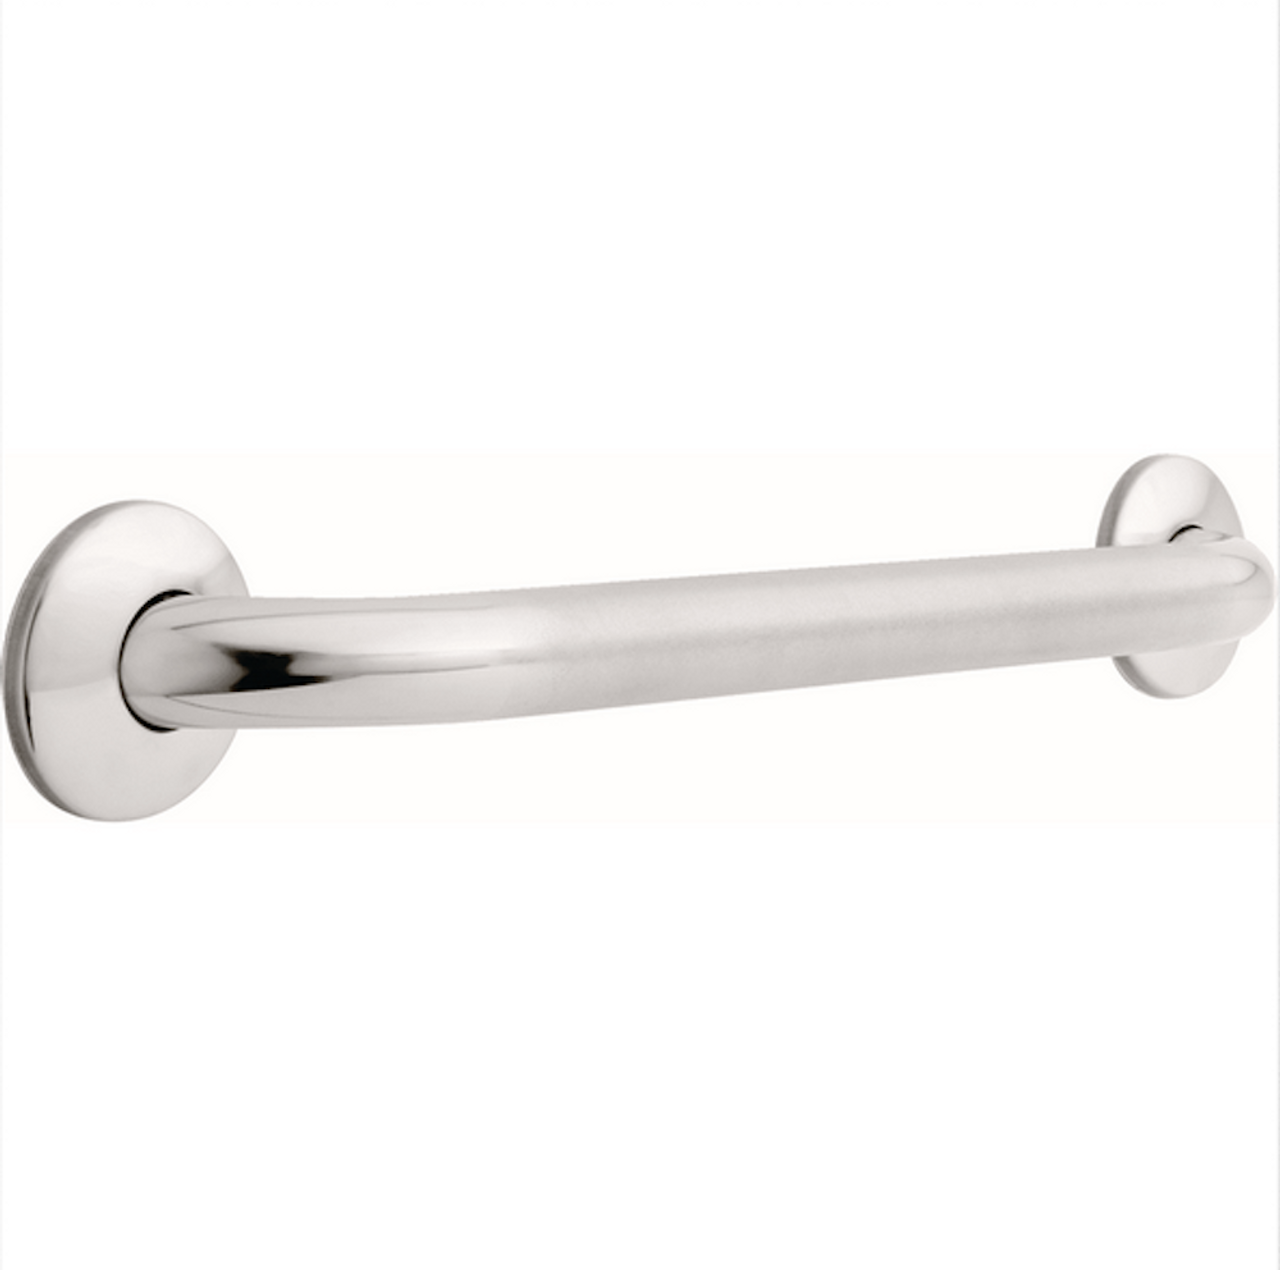 Franklin Brass 5718PSBS 18" Bath Safety Concealed Mount Grab Bar Peened Bright Stainless Finish